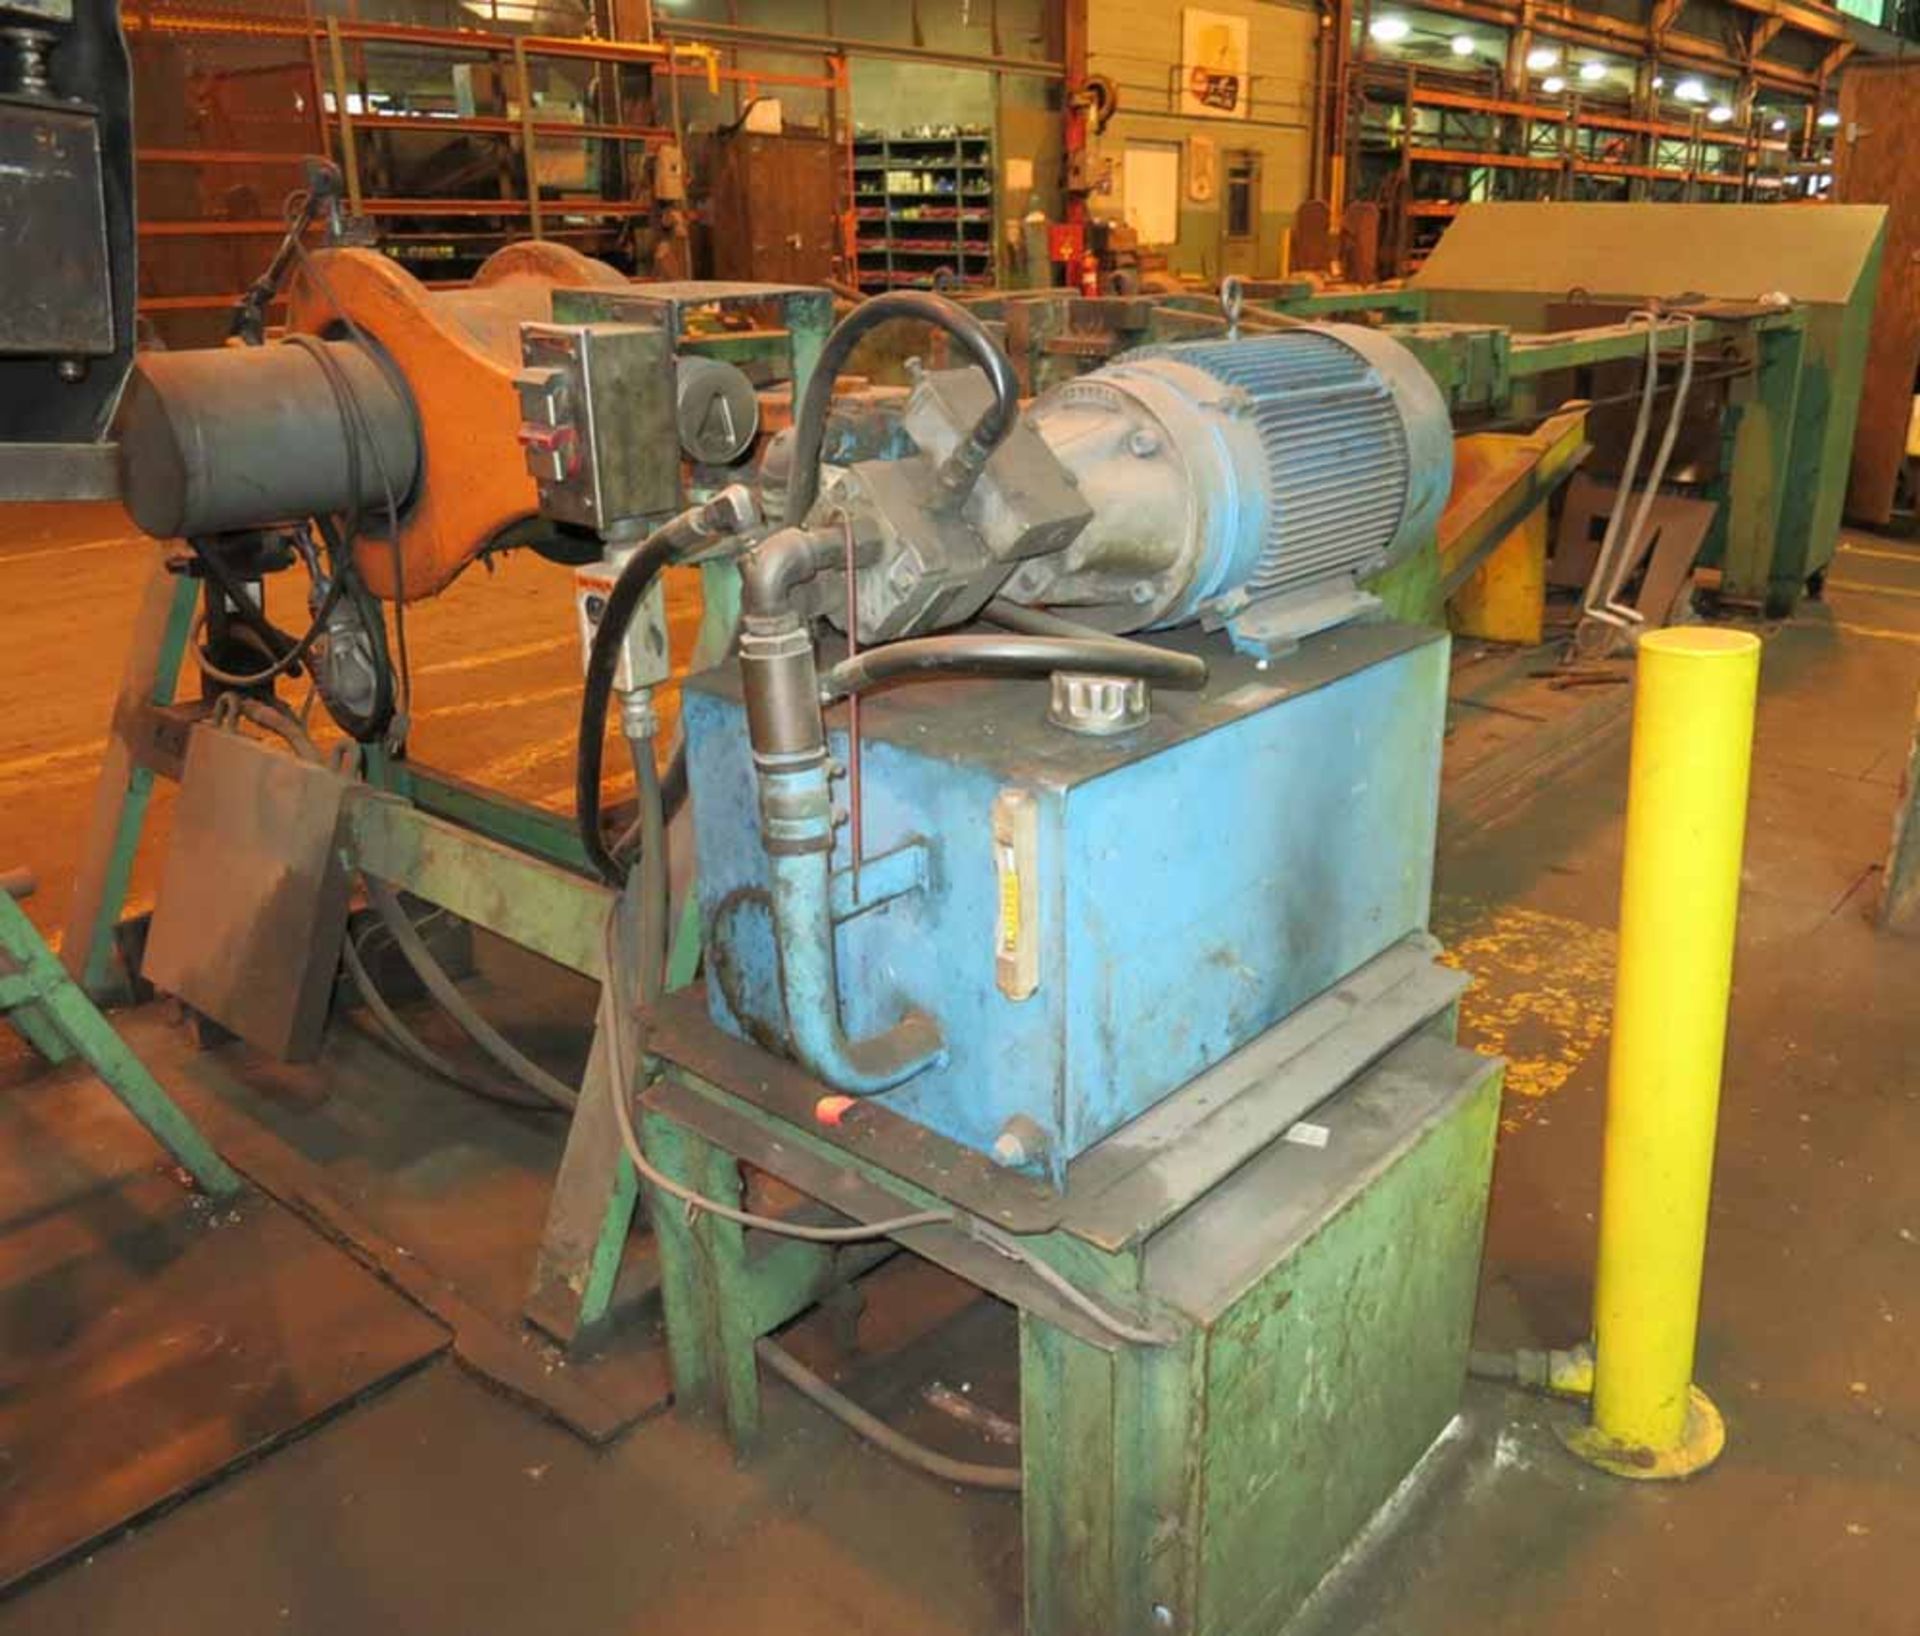 Rodgers Hyd. Horiz. Wheel Press, 200-Ton x 144" - Located in Painesville, OH - 6630 - Image 2 of 2